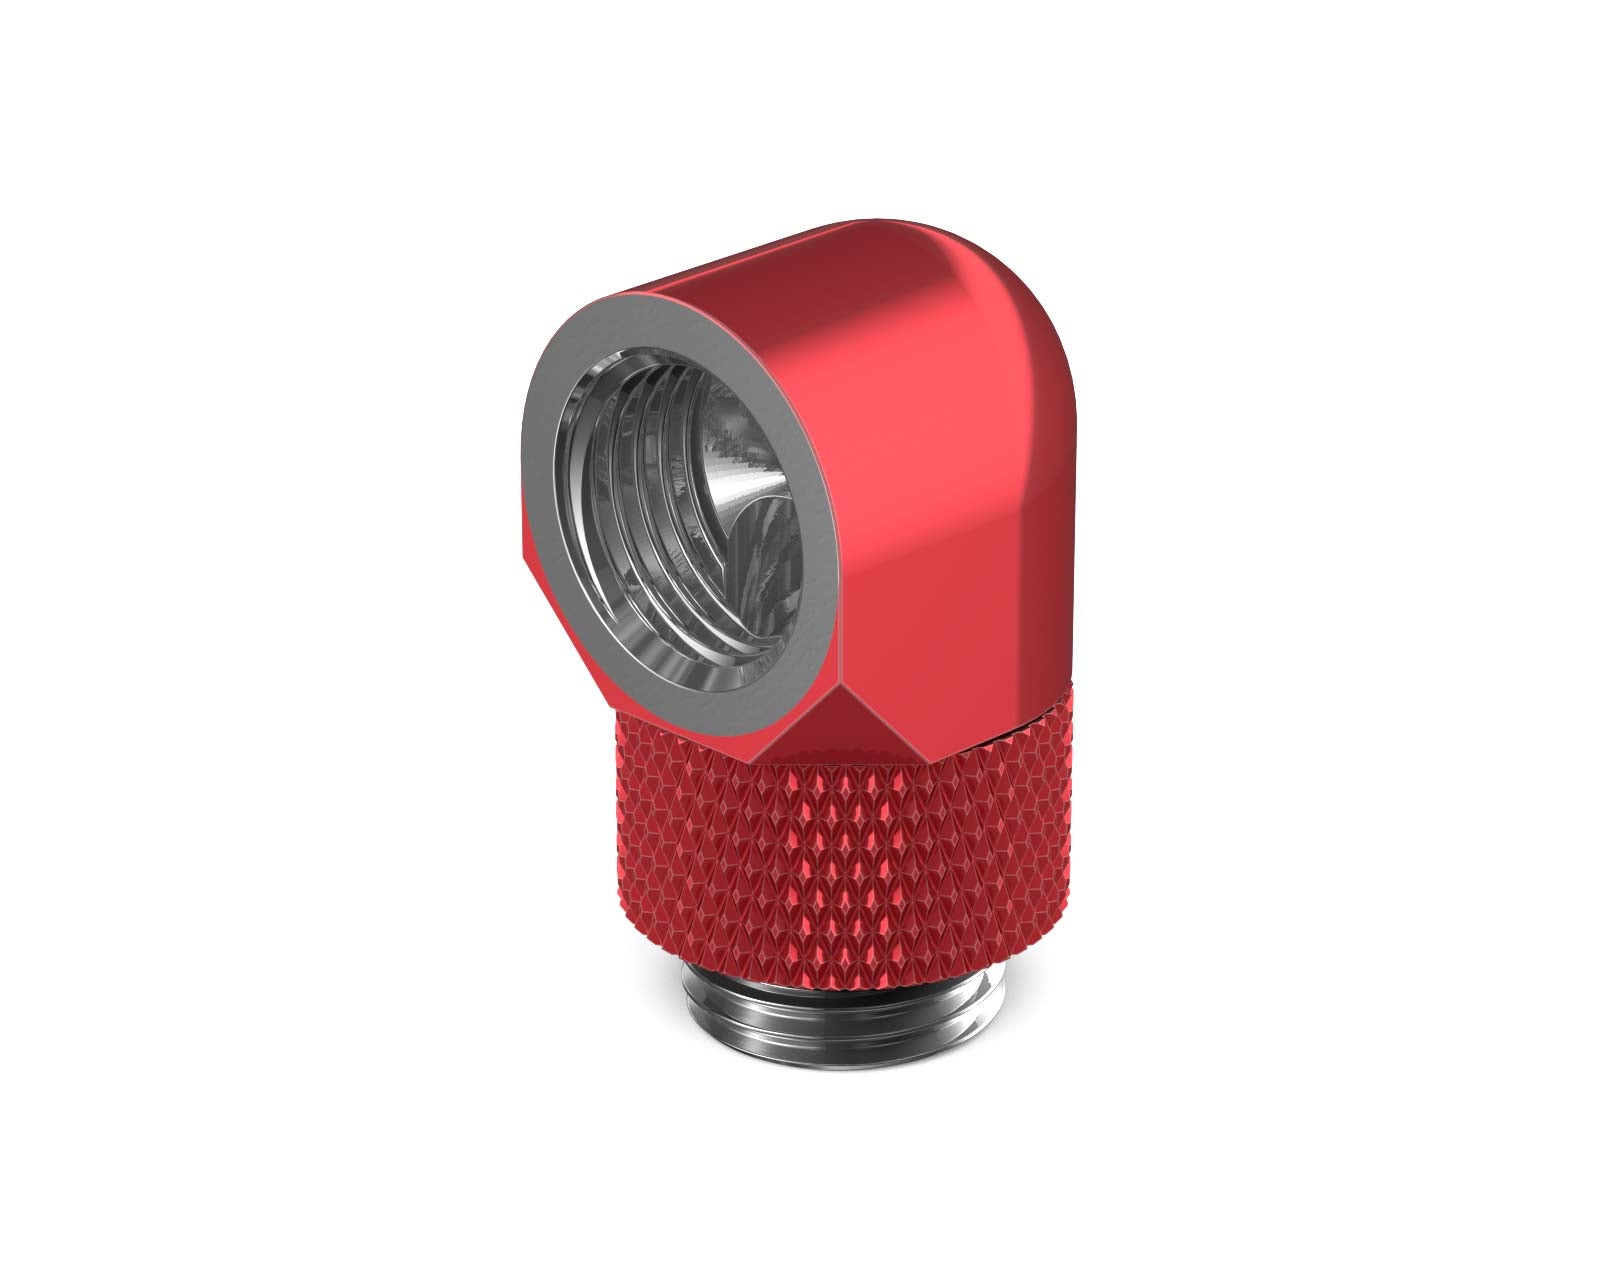 PrimoChill Male to Female G 1/4in. 90 Degree SX Rotary Elbow Fitting - PrimoChill - KEEPING IT COOL Candy Red